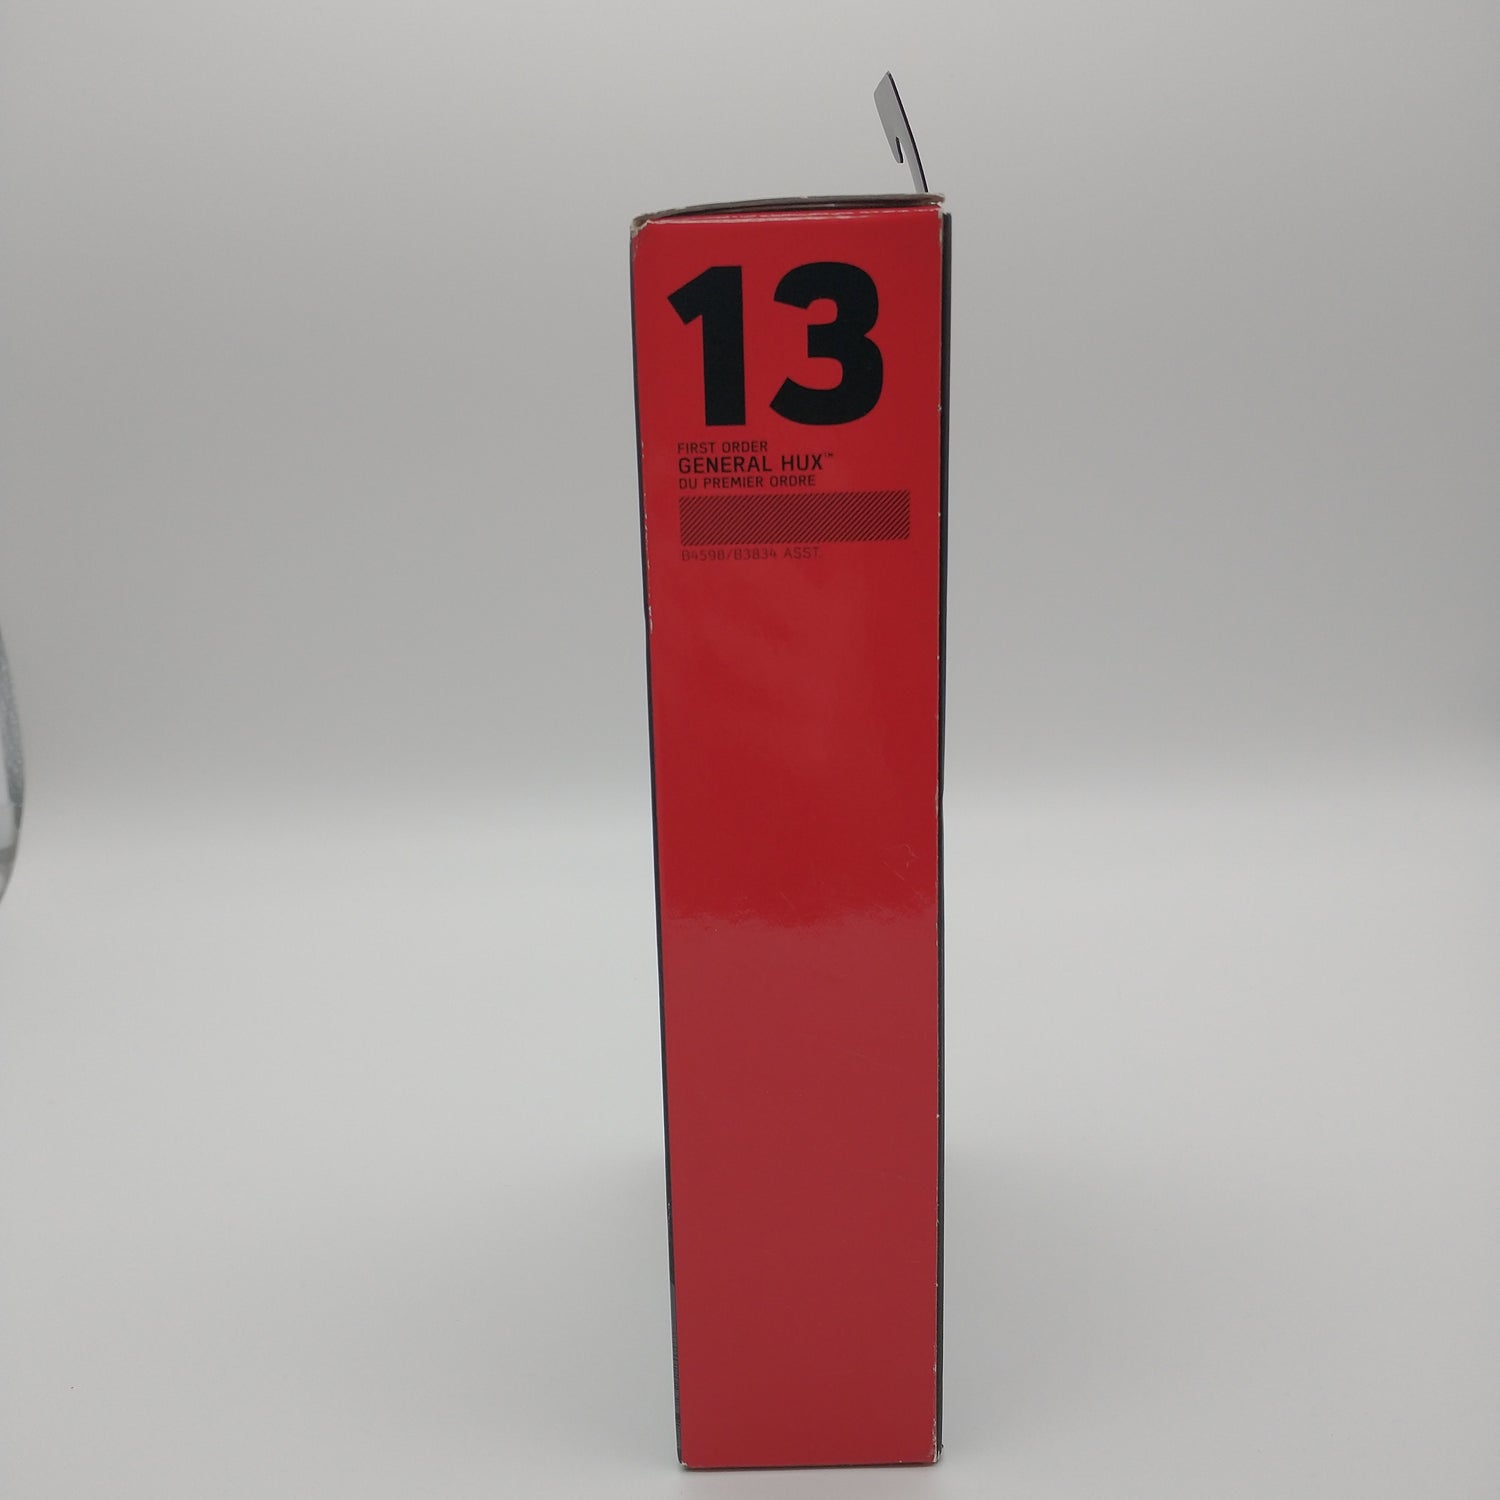 The side of the box is red with the number 13 written on the top in black lettering.